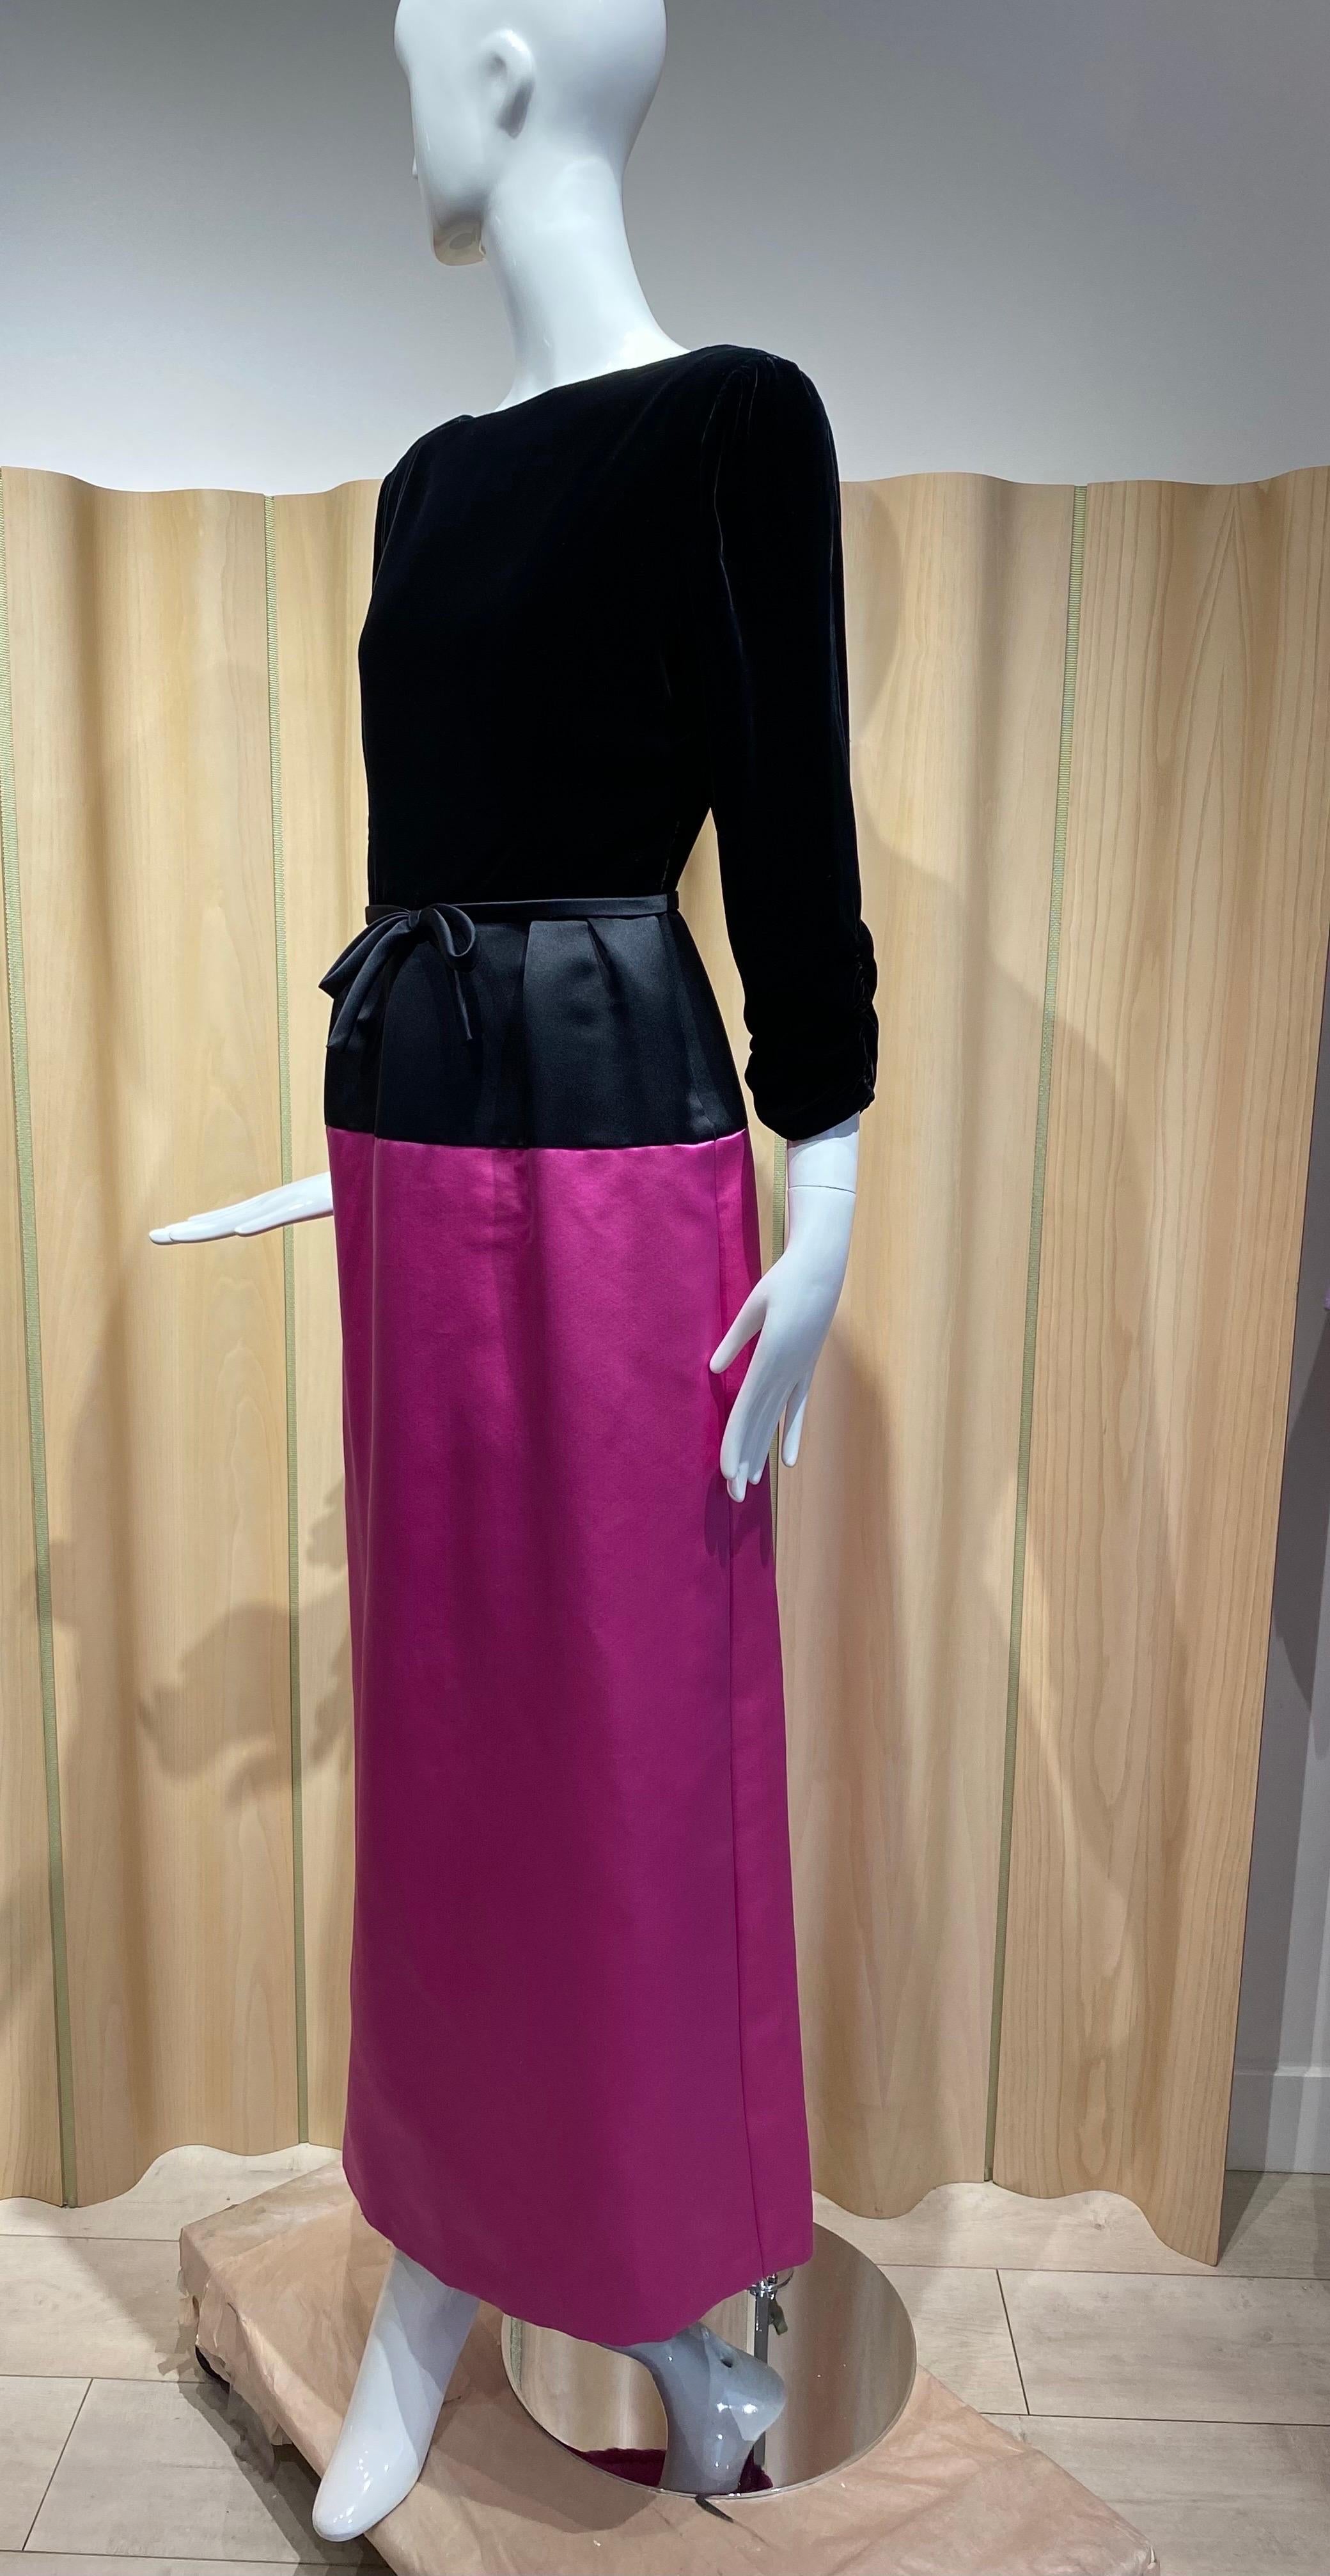 1980s Bill Blass Black and Pink Cocktail Dress For Sale 3